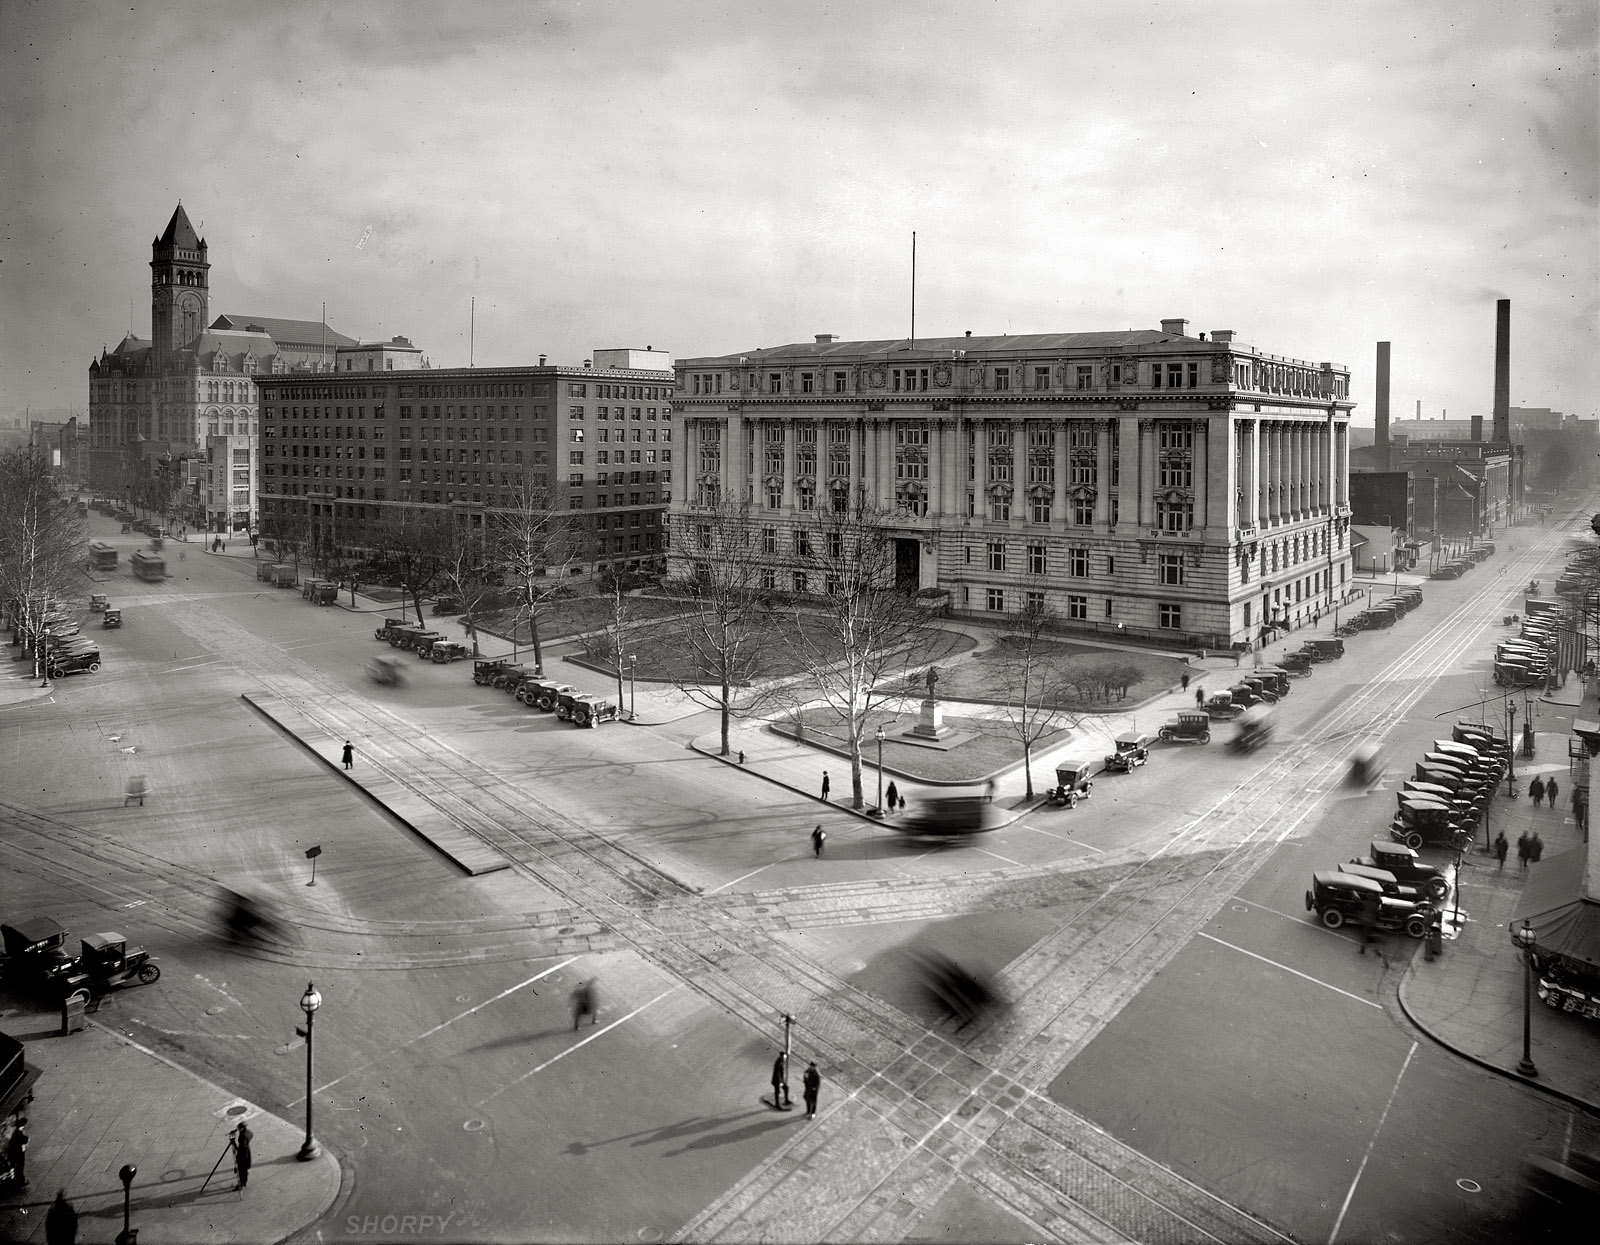 "Municipal Building, Southern Railway, and Post Office Department, from the Willard Hotel roof." An ethereal, almost spectral view of Pennsylvania Avenue at 14th Street N.W. in Washington circa 1921, with the Old Post Office tower at left. National Photo Company Collection glass negative. View full size.